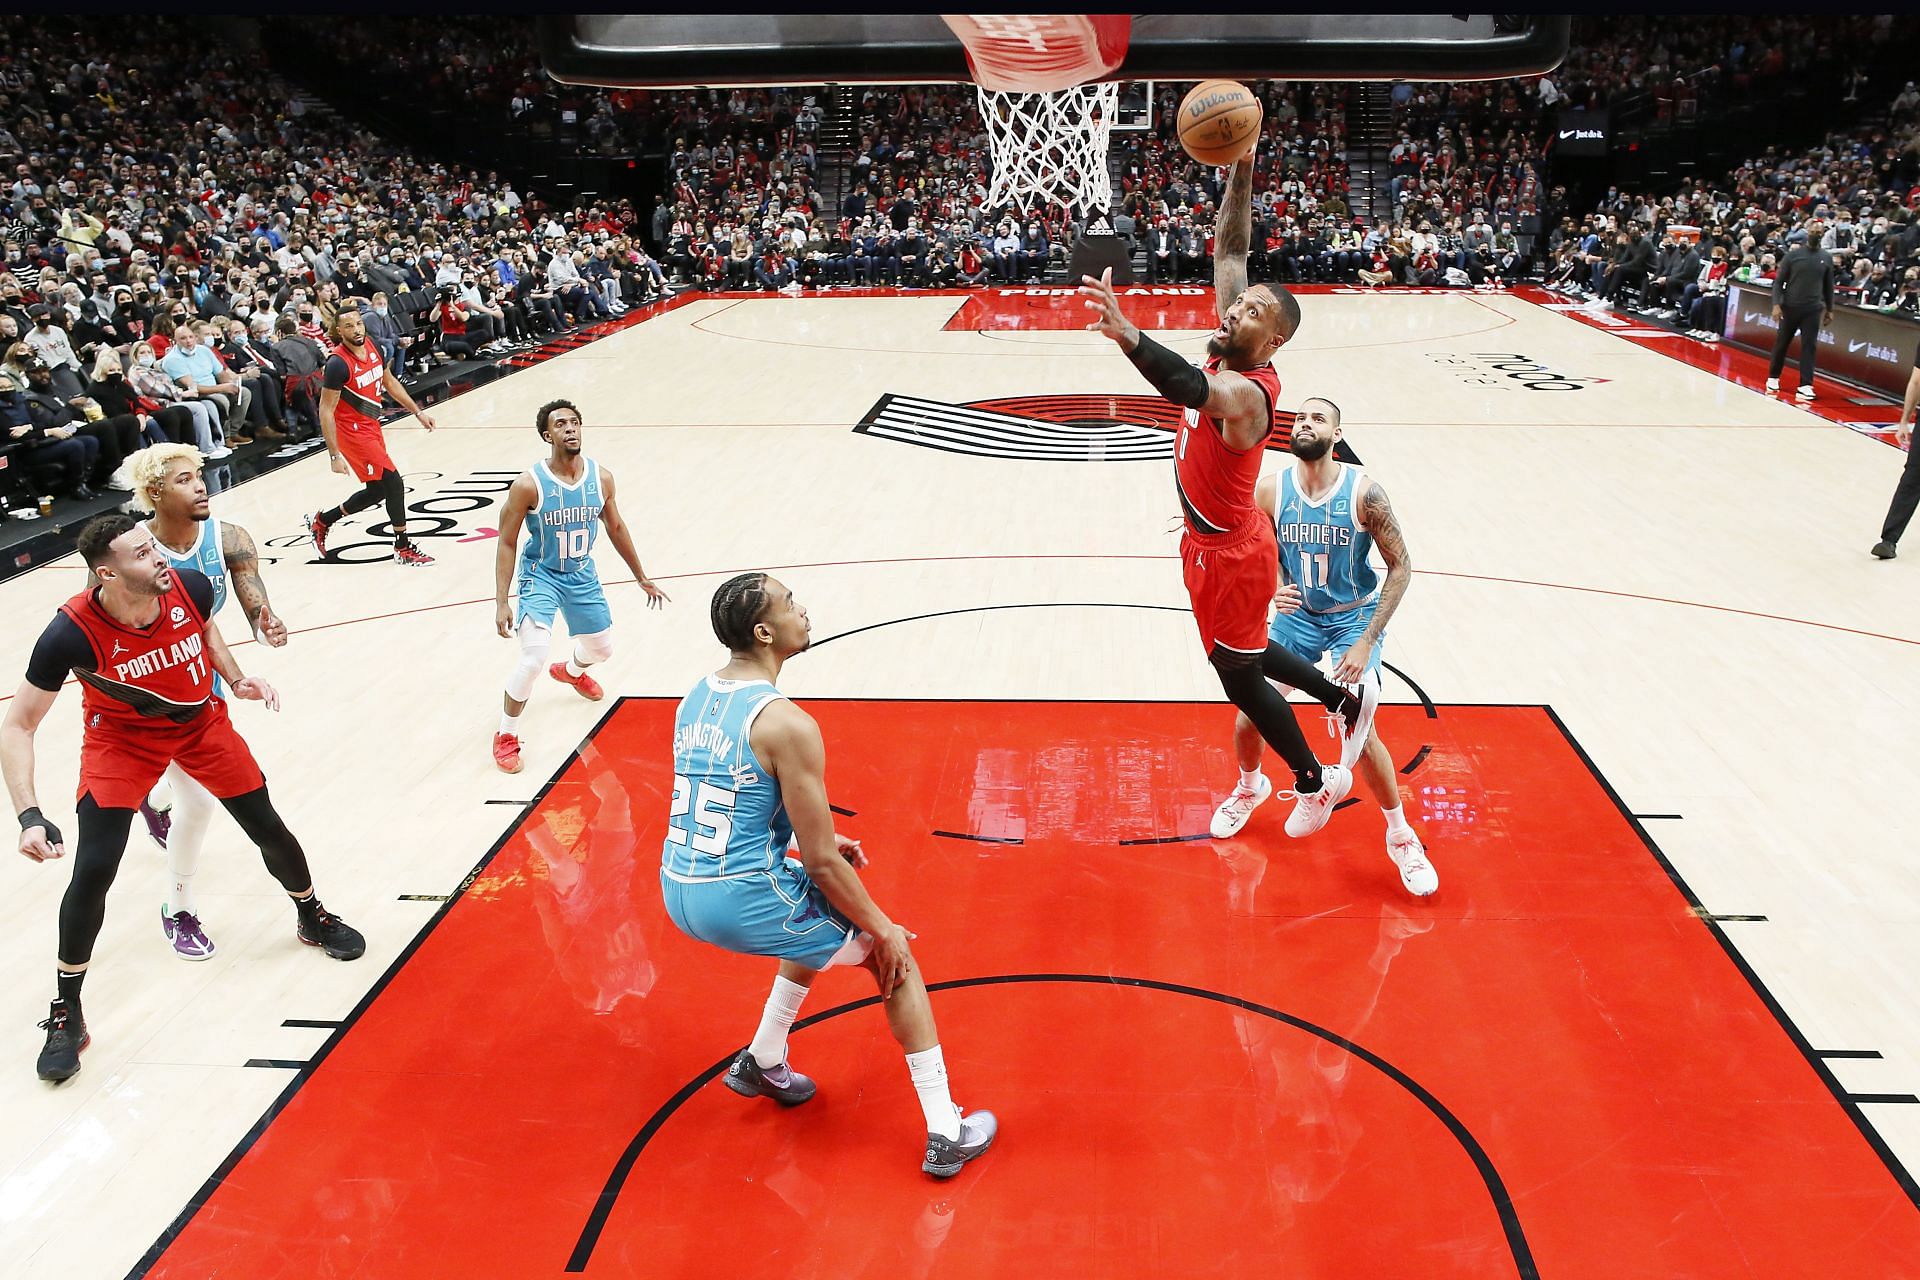 Damian Lillard goes up for a dunk against the Charlotte Hornets